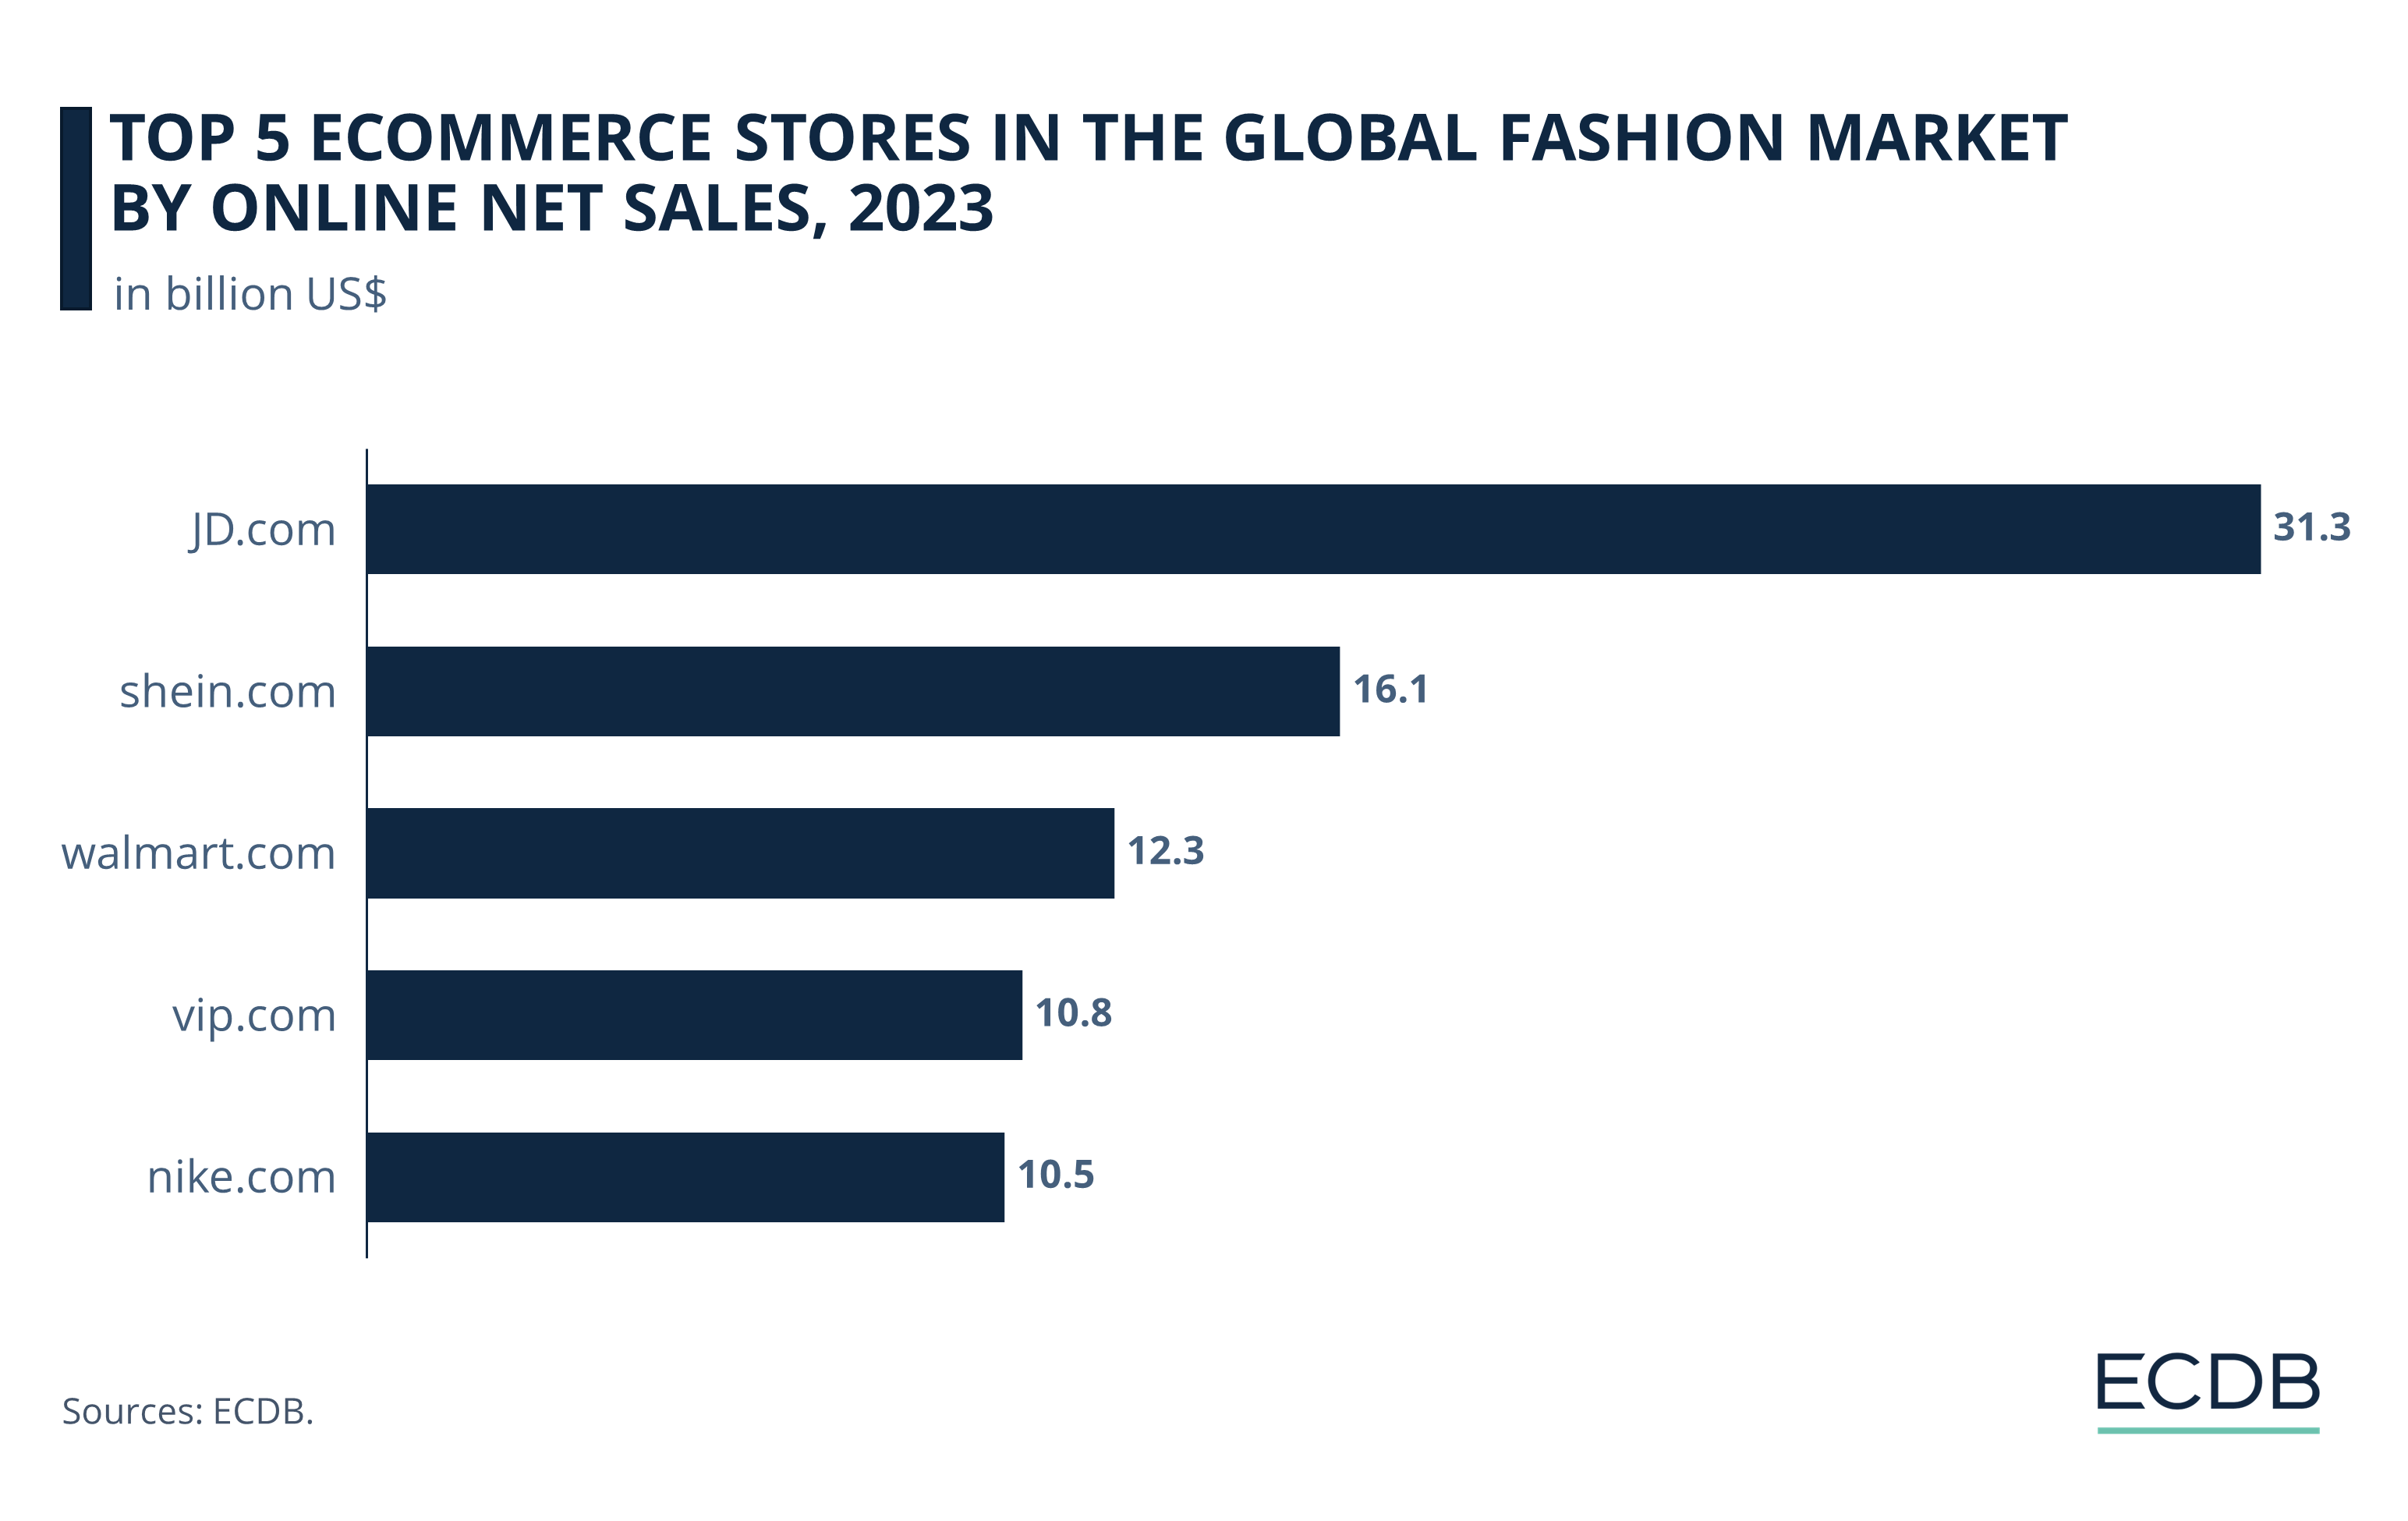 Top 5 eCommerce Stores in the Global Fashion Market by Online Net Sales, 2023